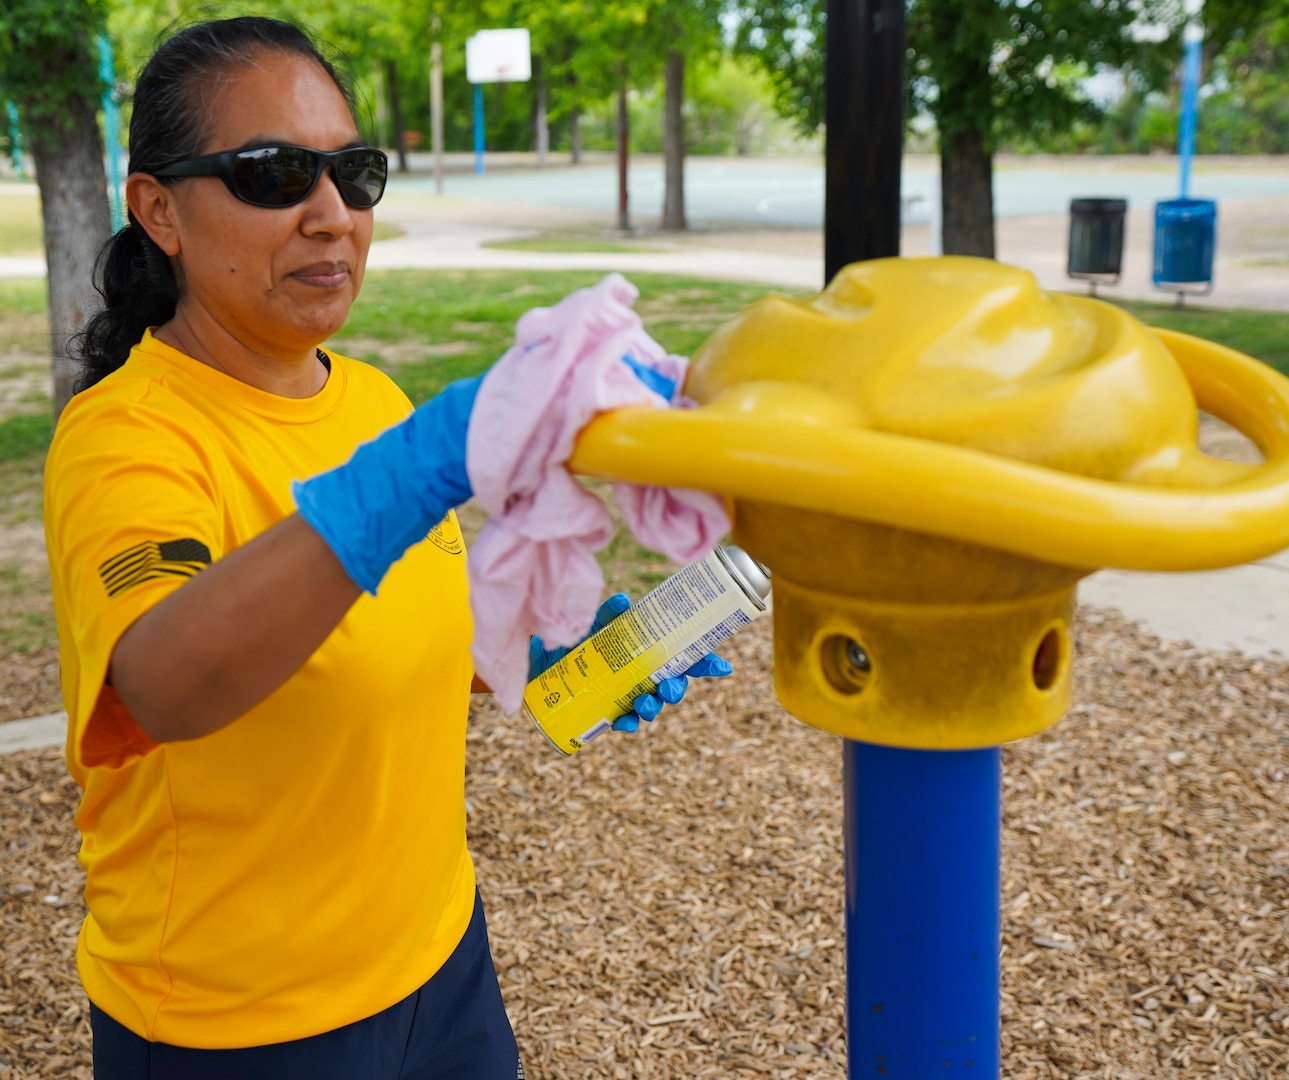 Chief Petty Officer Irene Aguilar, assigned to Navy Medicine Education, Training and Logistics Command at Joint Base San Antonio-Fort Sam Houston, disinfects parts of playground during a community relations event held at Martinez Park during a Sailor 360 event. Sailor 360 is a command-level program for junior enlisted, senior enlisted and junior officers designed to strengthen and develop leadership through COMREL events, classroom discussions and physical training events.